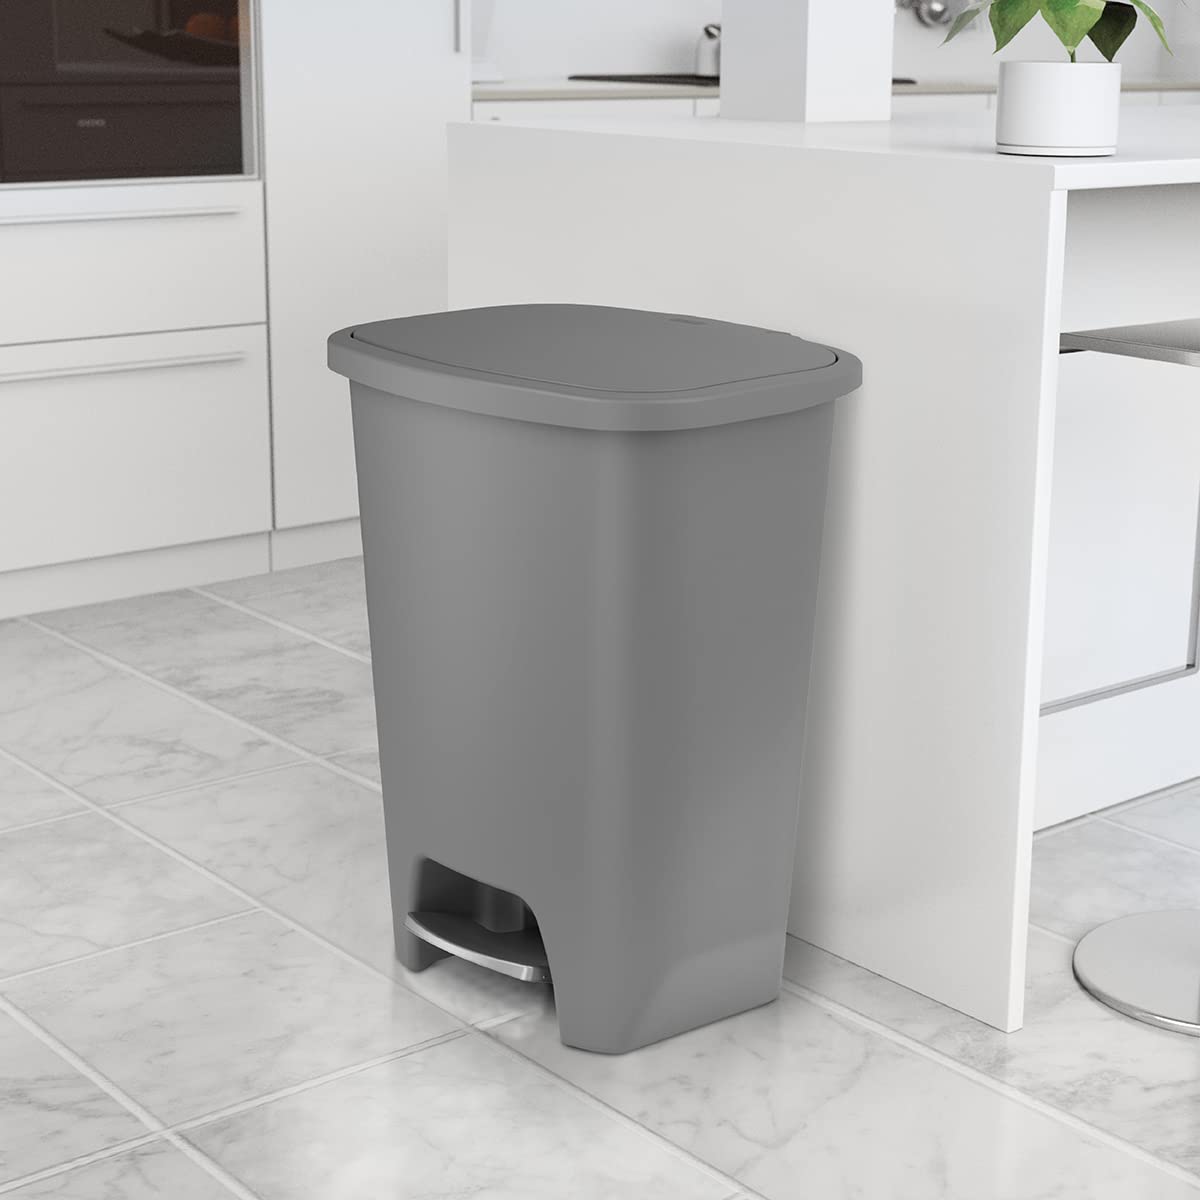 https://bigbigmart.com/wp-content/uploads/2023/10/Glad-Kitchen-Trash-Can-Large-Plastic-Waste-Bin-with-Odor-Protection-of-Lid-Hands-Free-with-Step-On-Foot-Pedal-and-Garbage-Bag-Rings-20-Gallon-Grey3.jpg